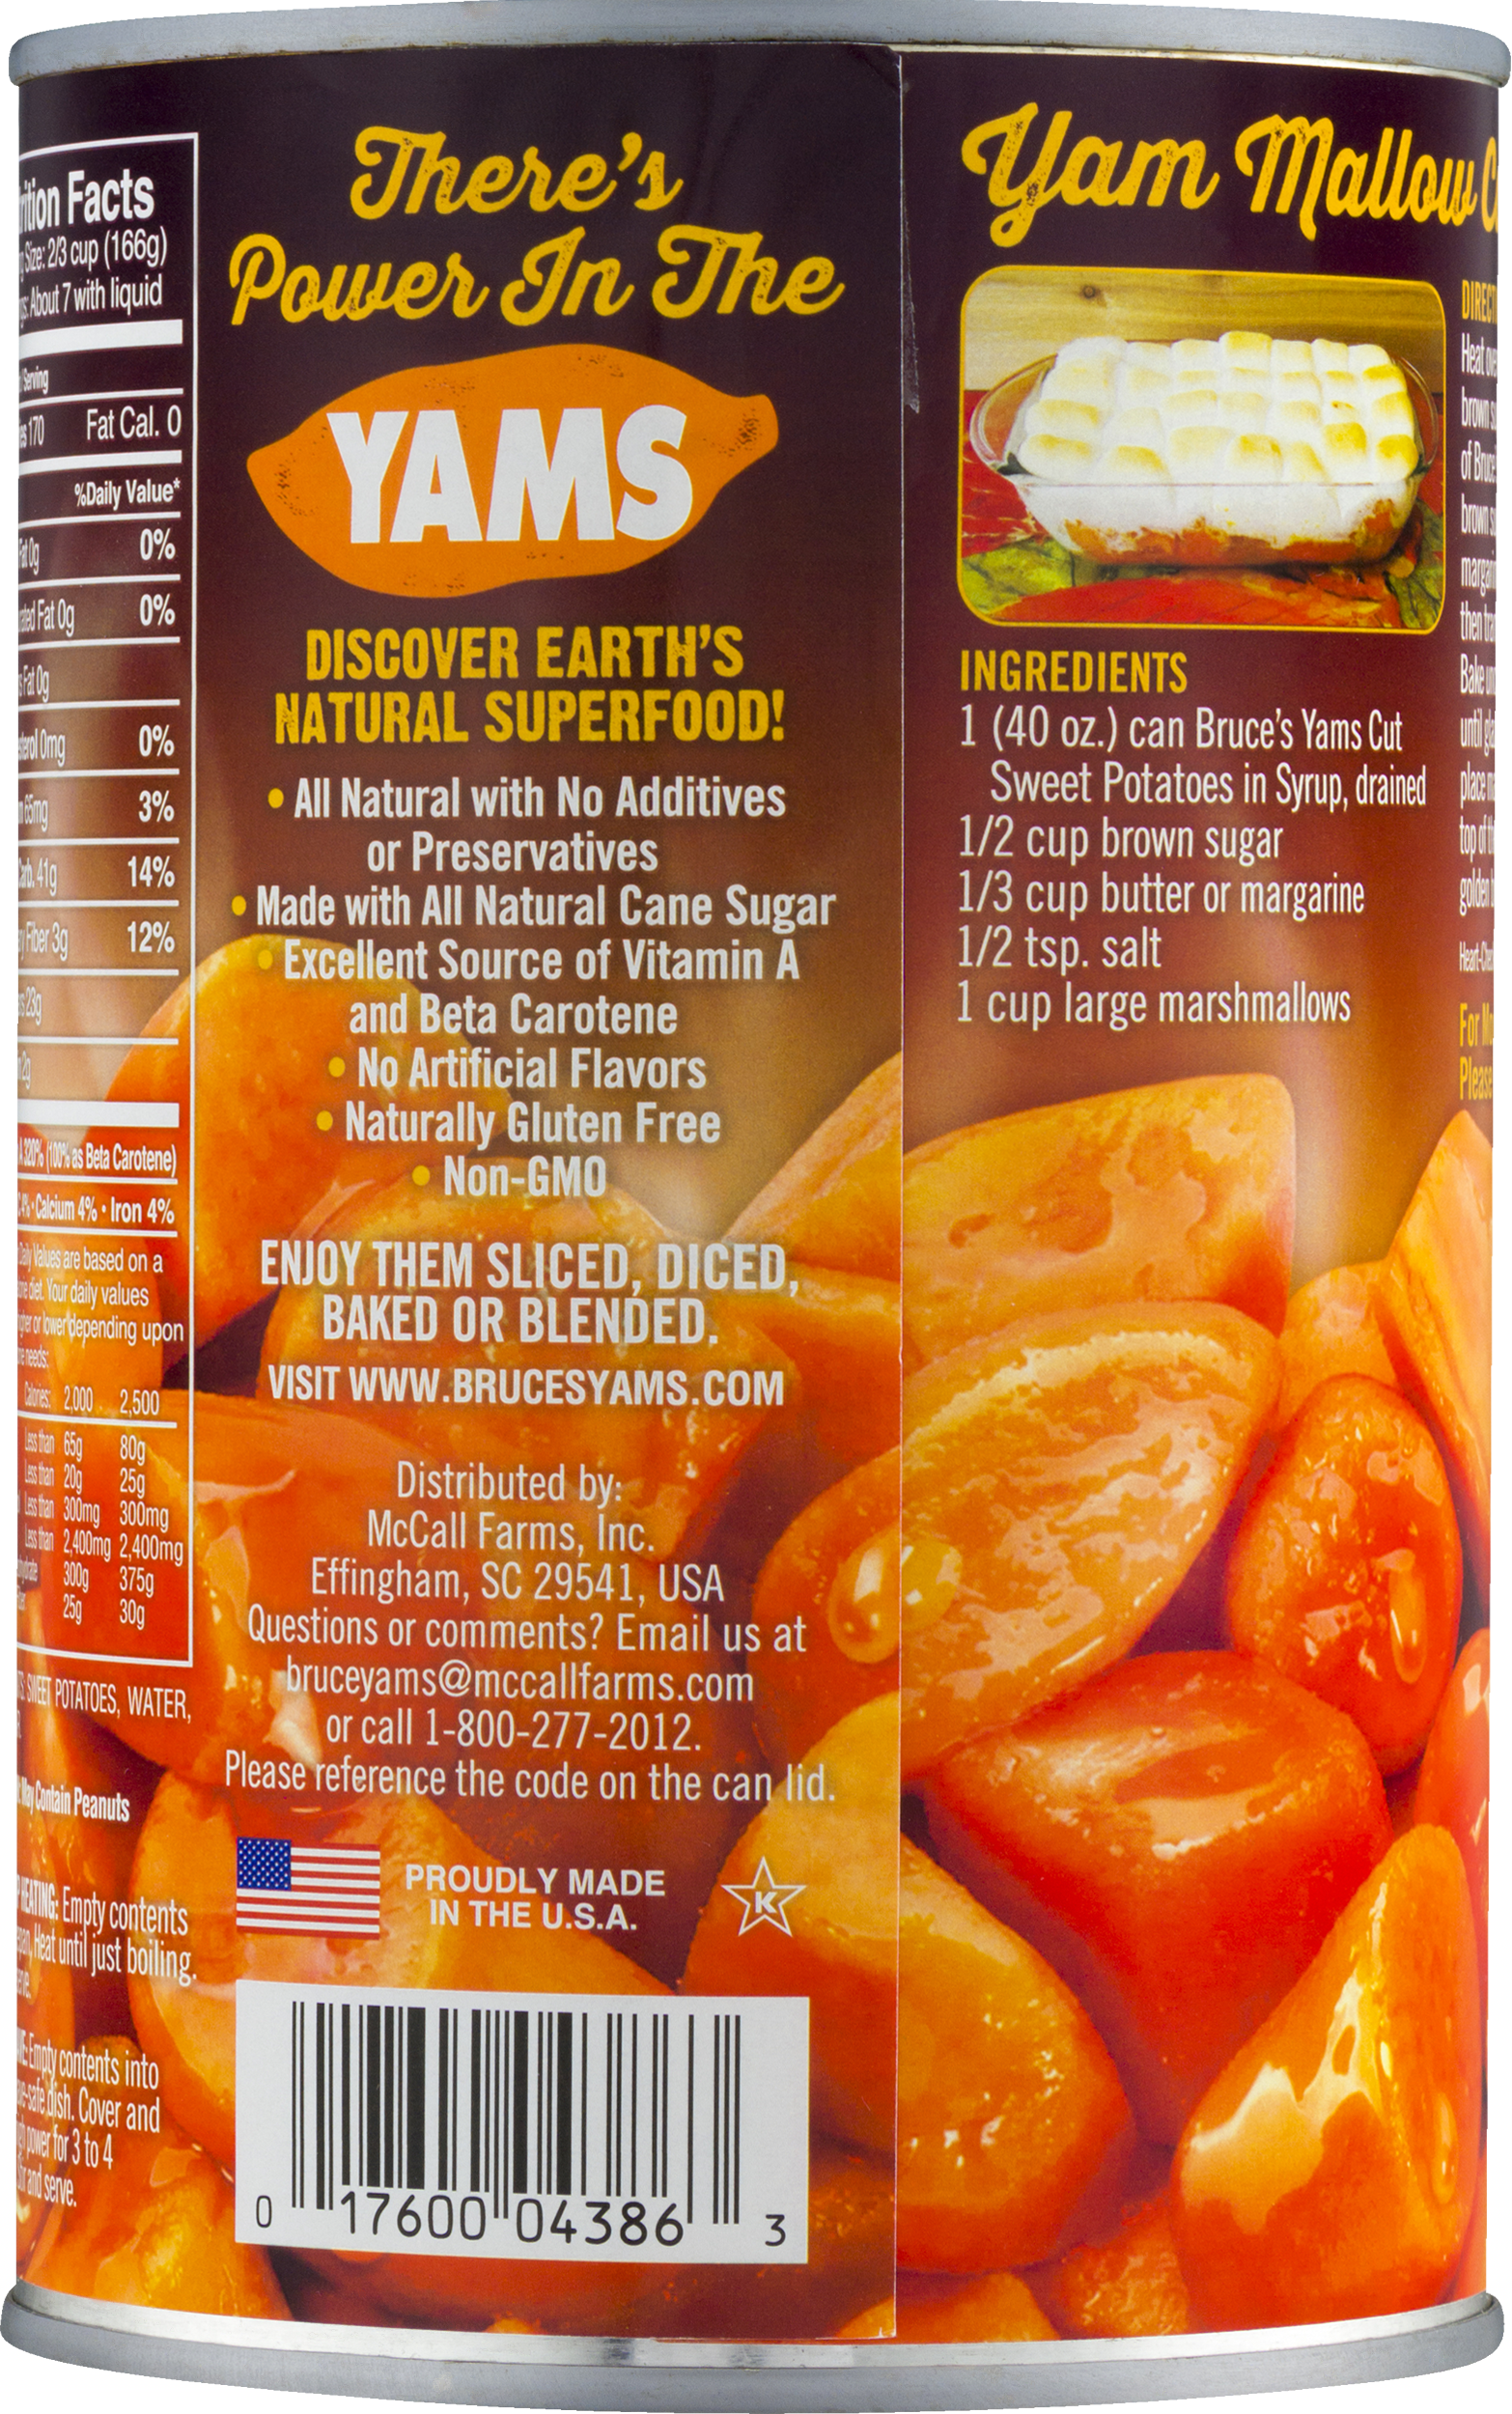 What are some good recipes for Bruce's Yams?